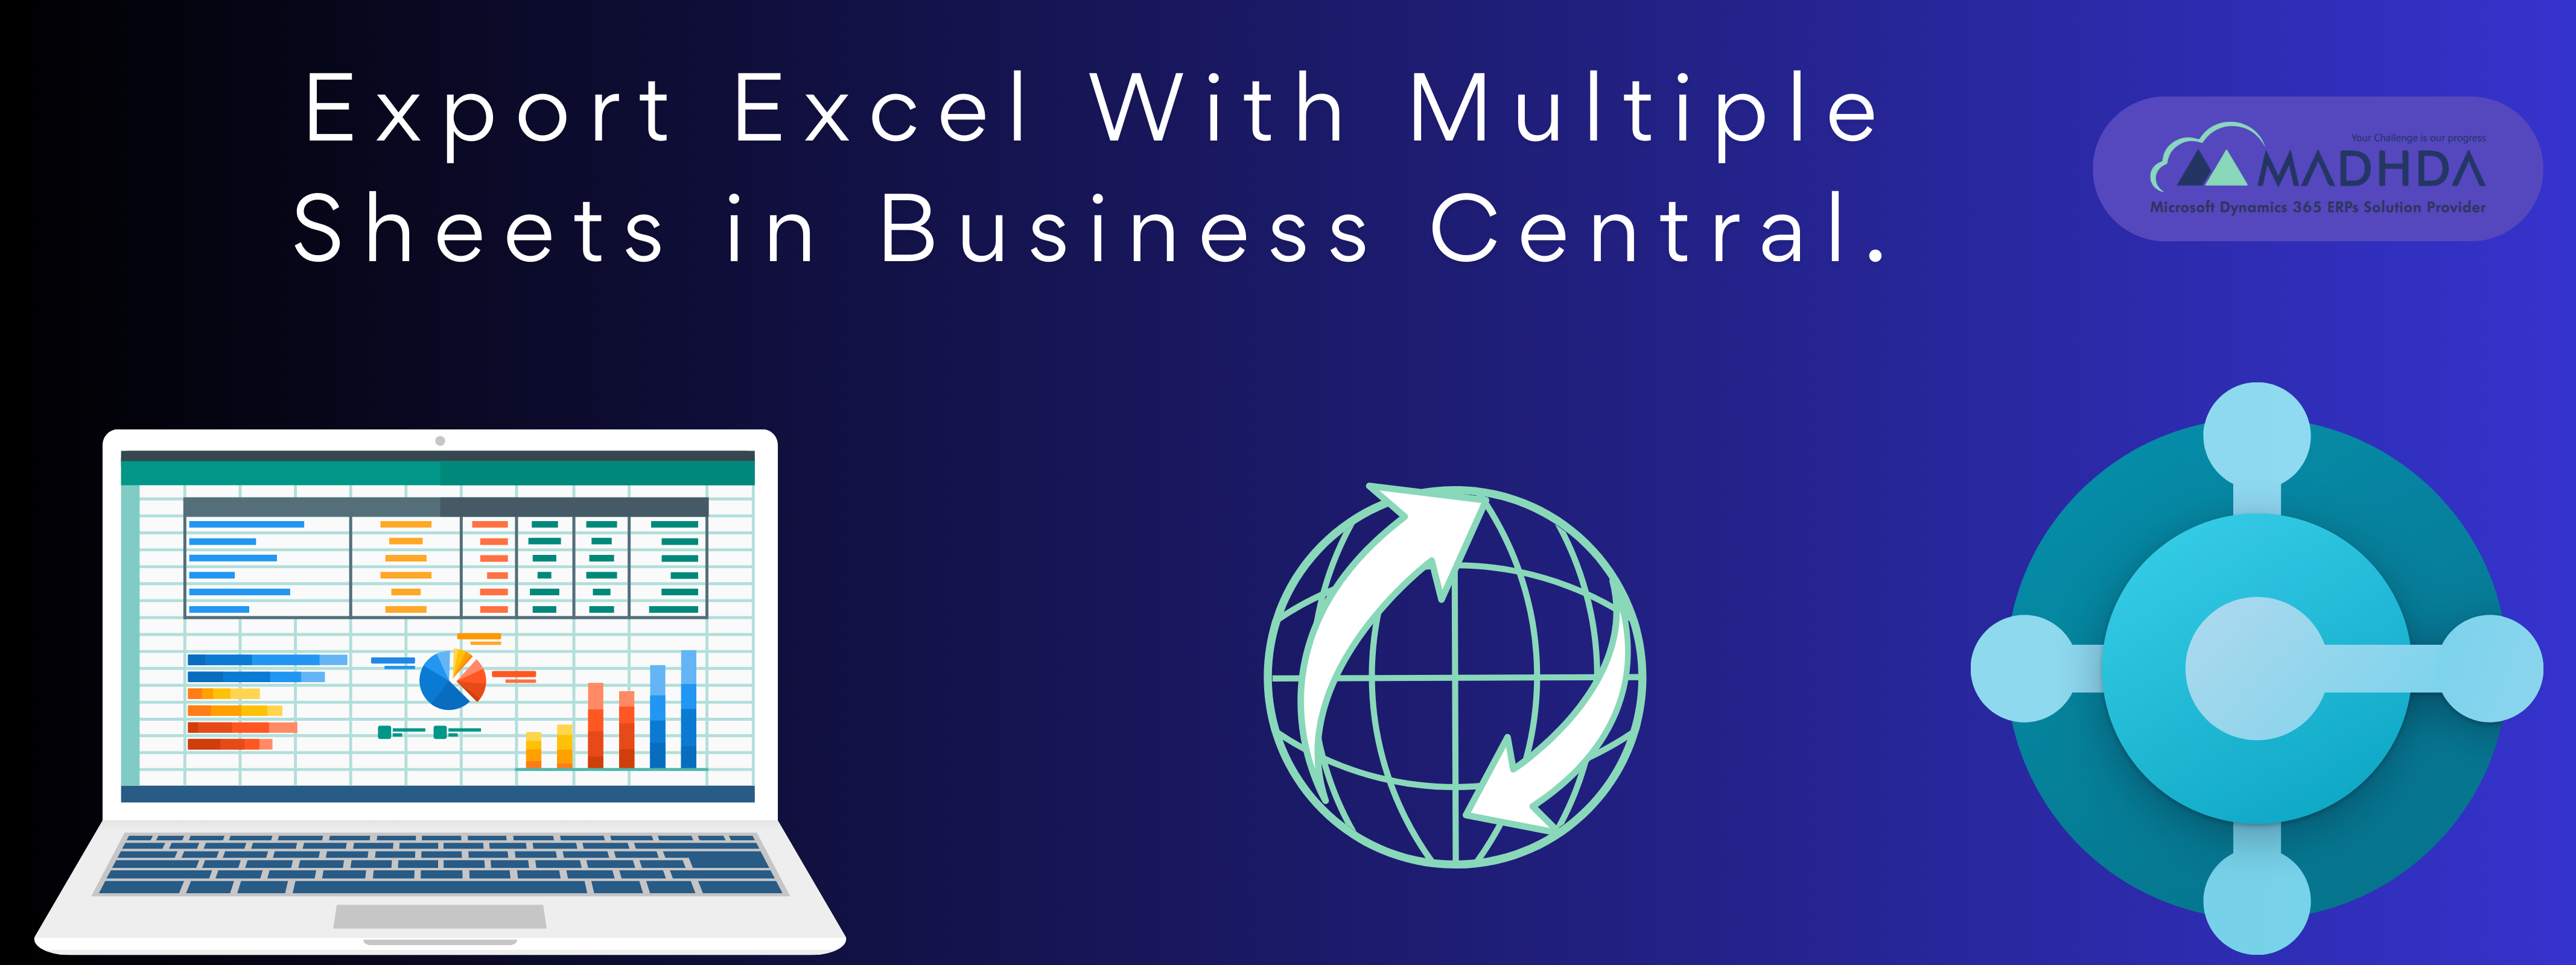 Export Excel With Multiple Sheets in Business Central. (2)